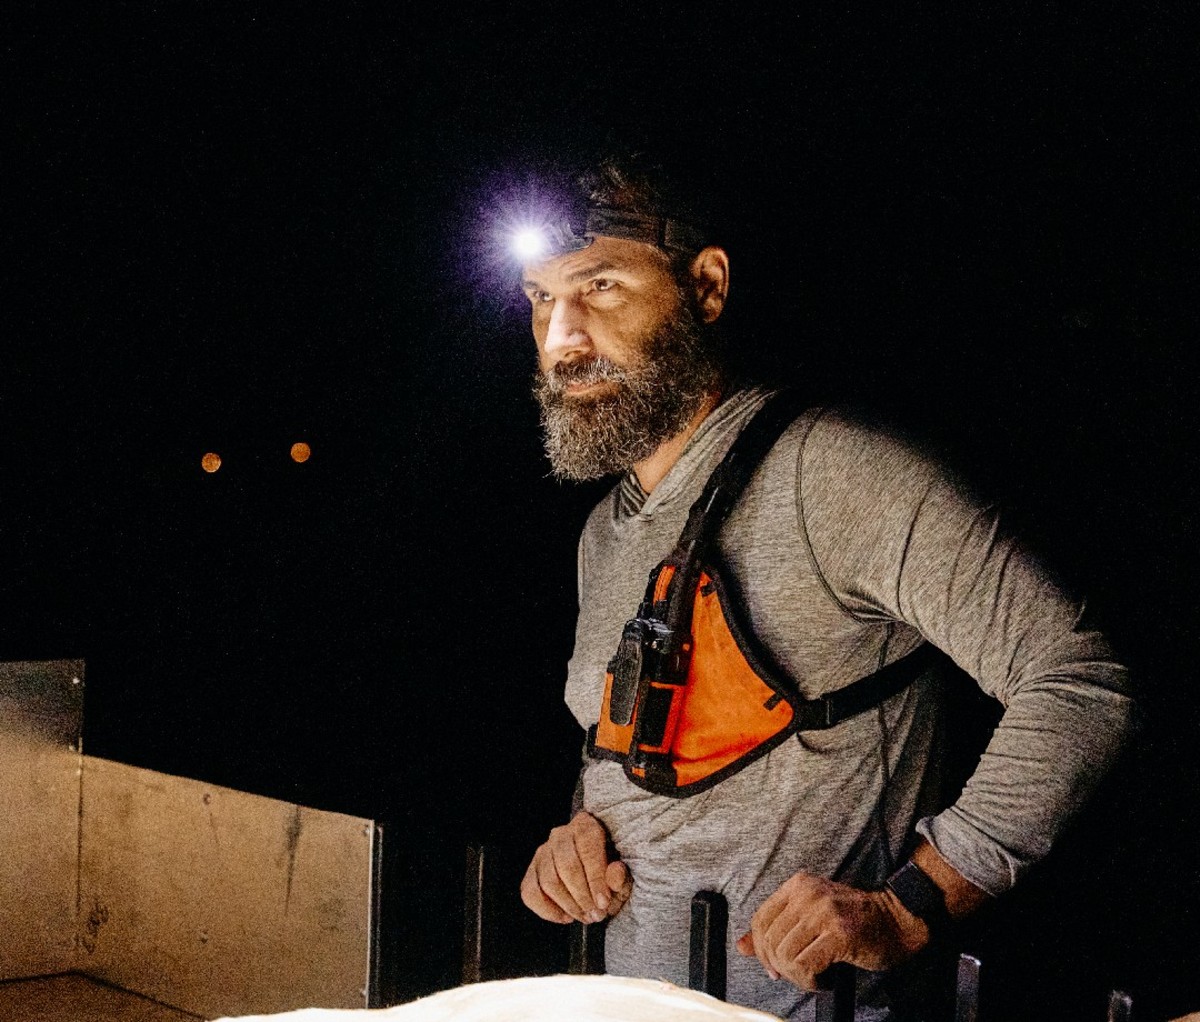 Man with headlamp and vest on